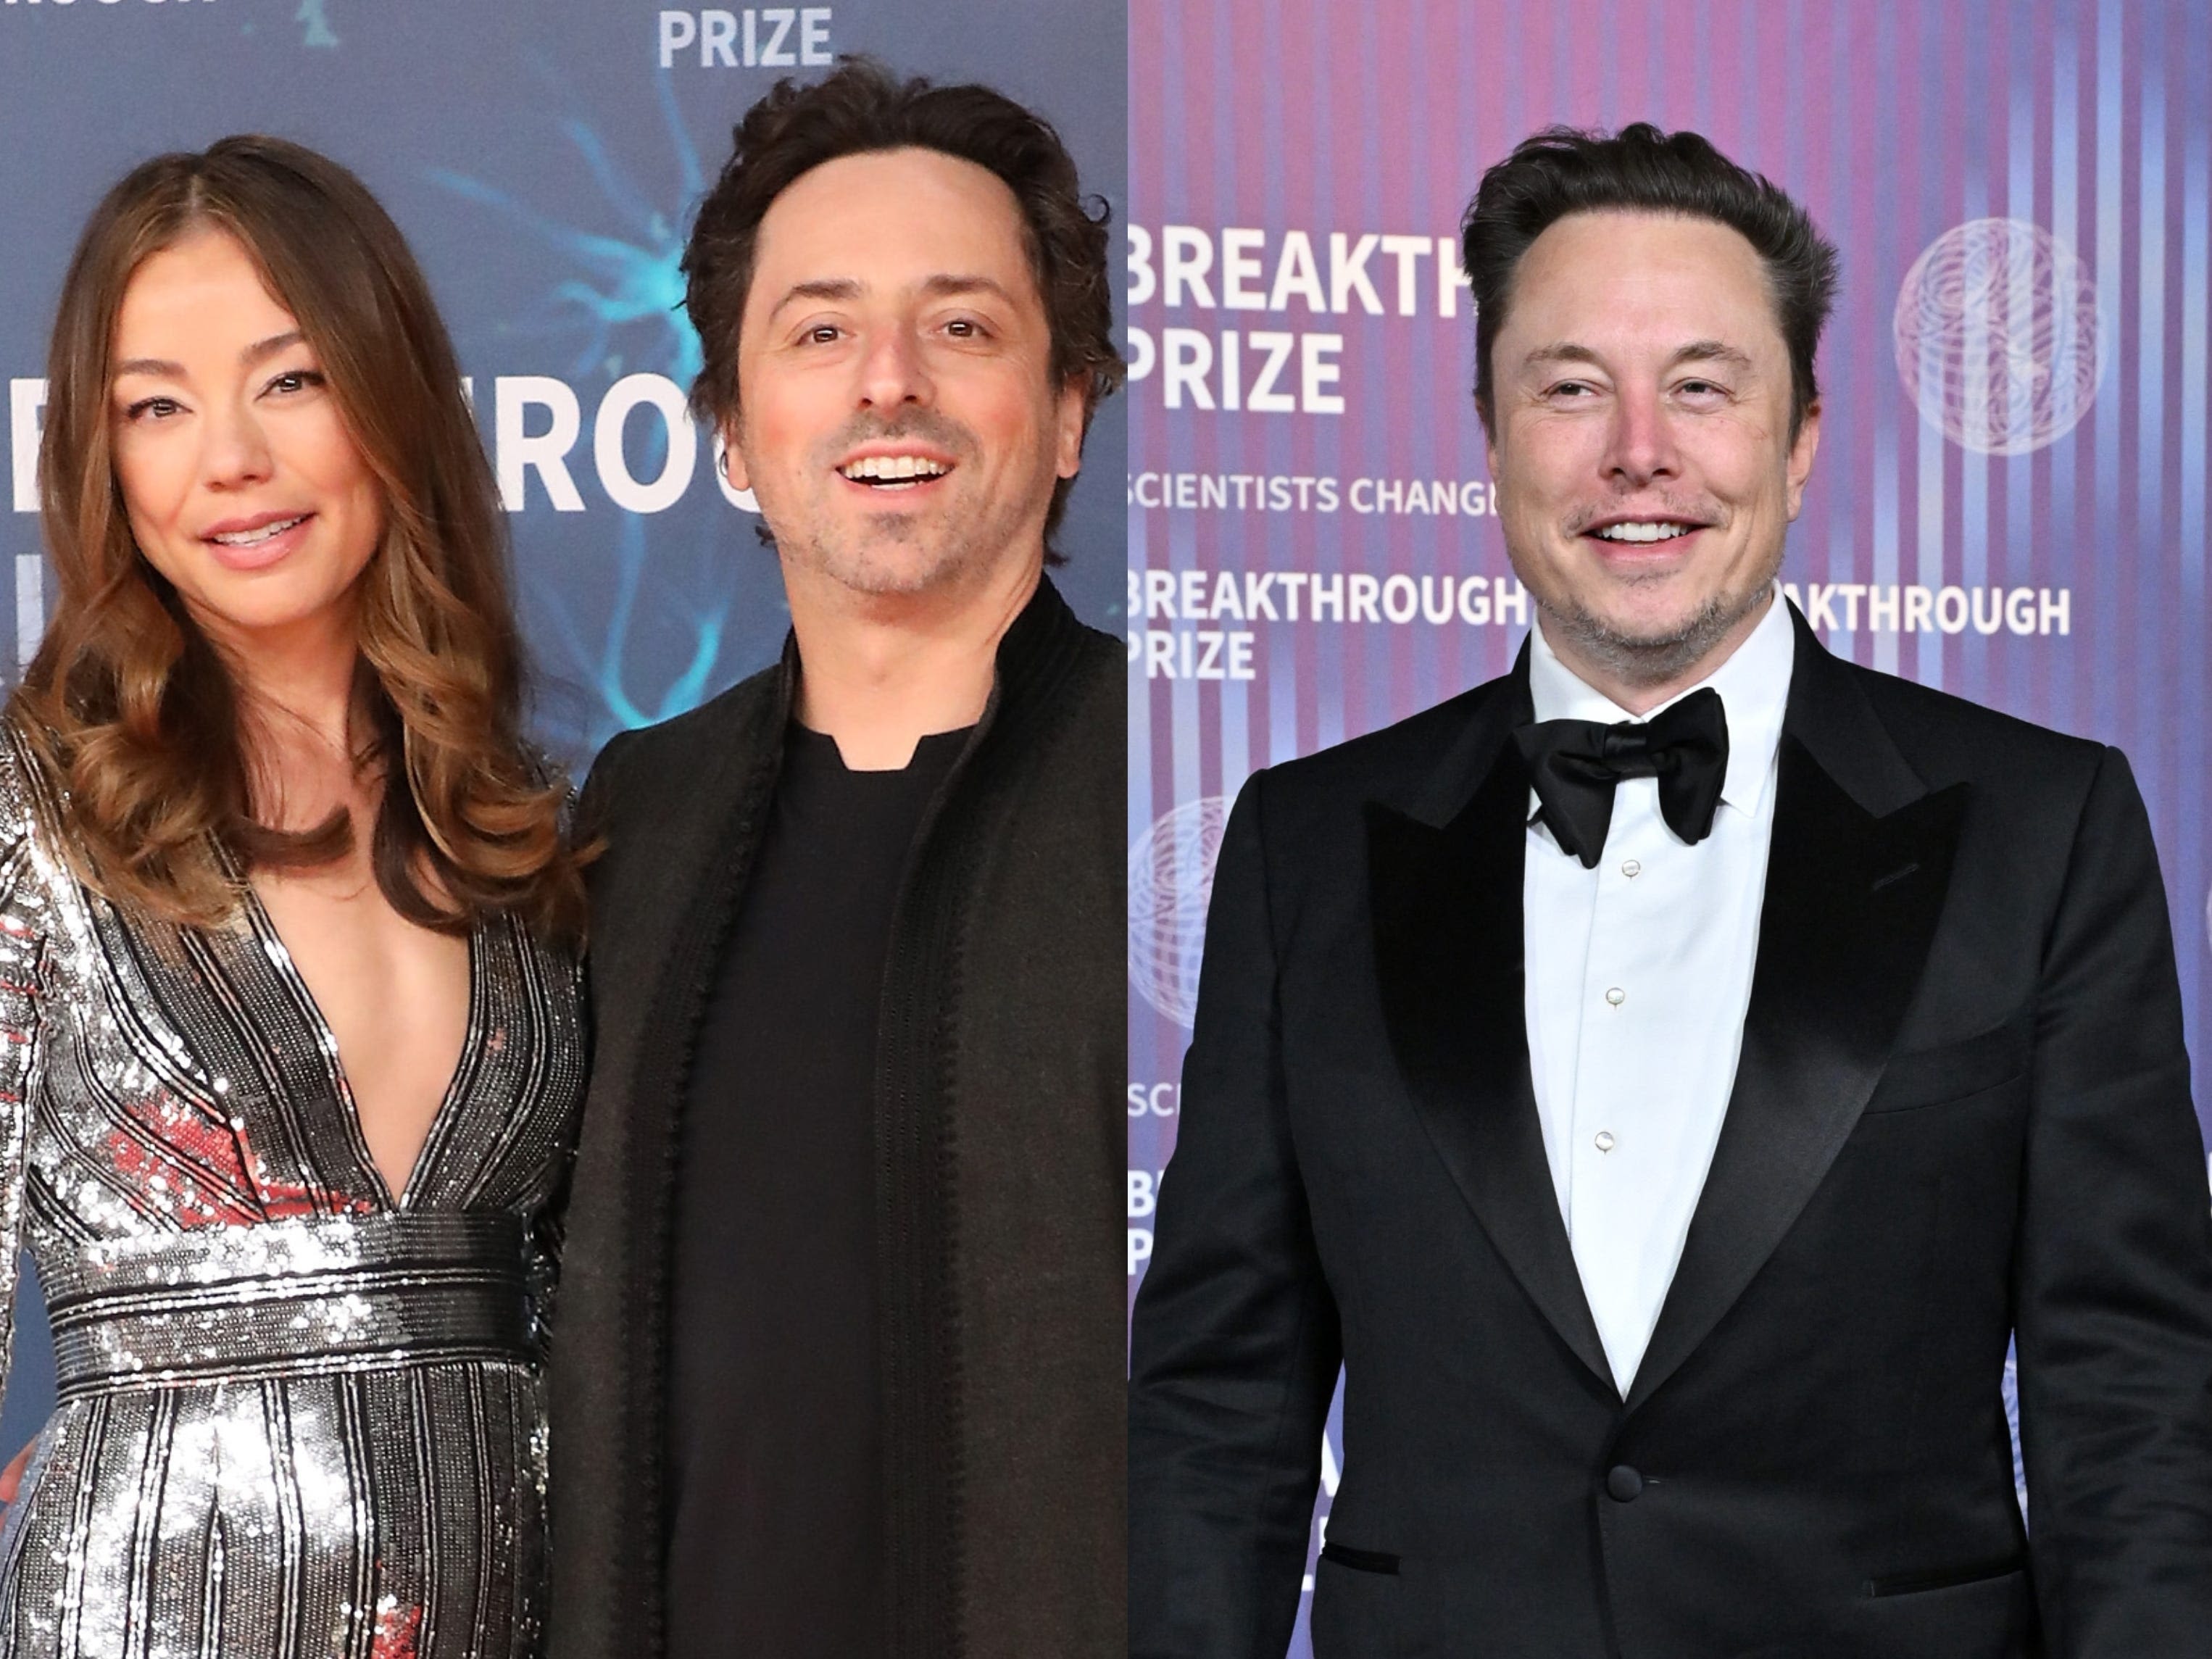 New York Times publishes fresh details on the alleged affair that Elon Musk and Nicole Shanahan both deny